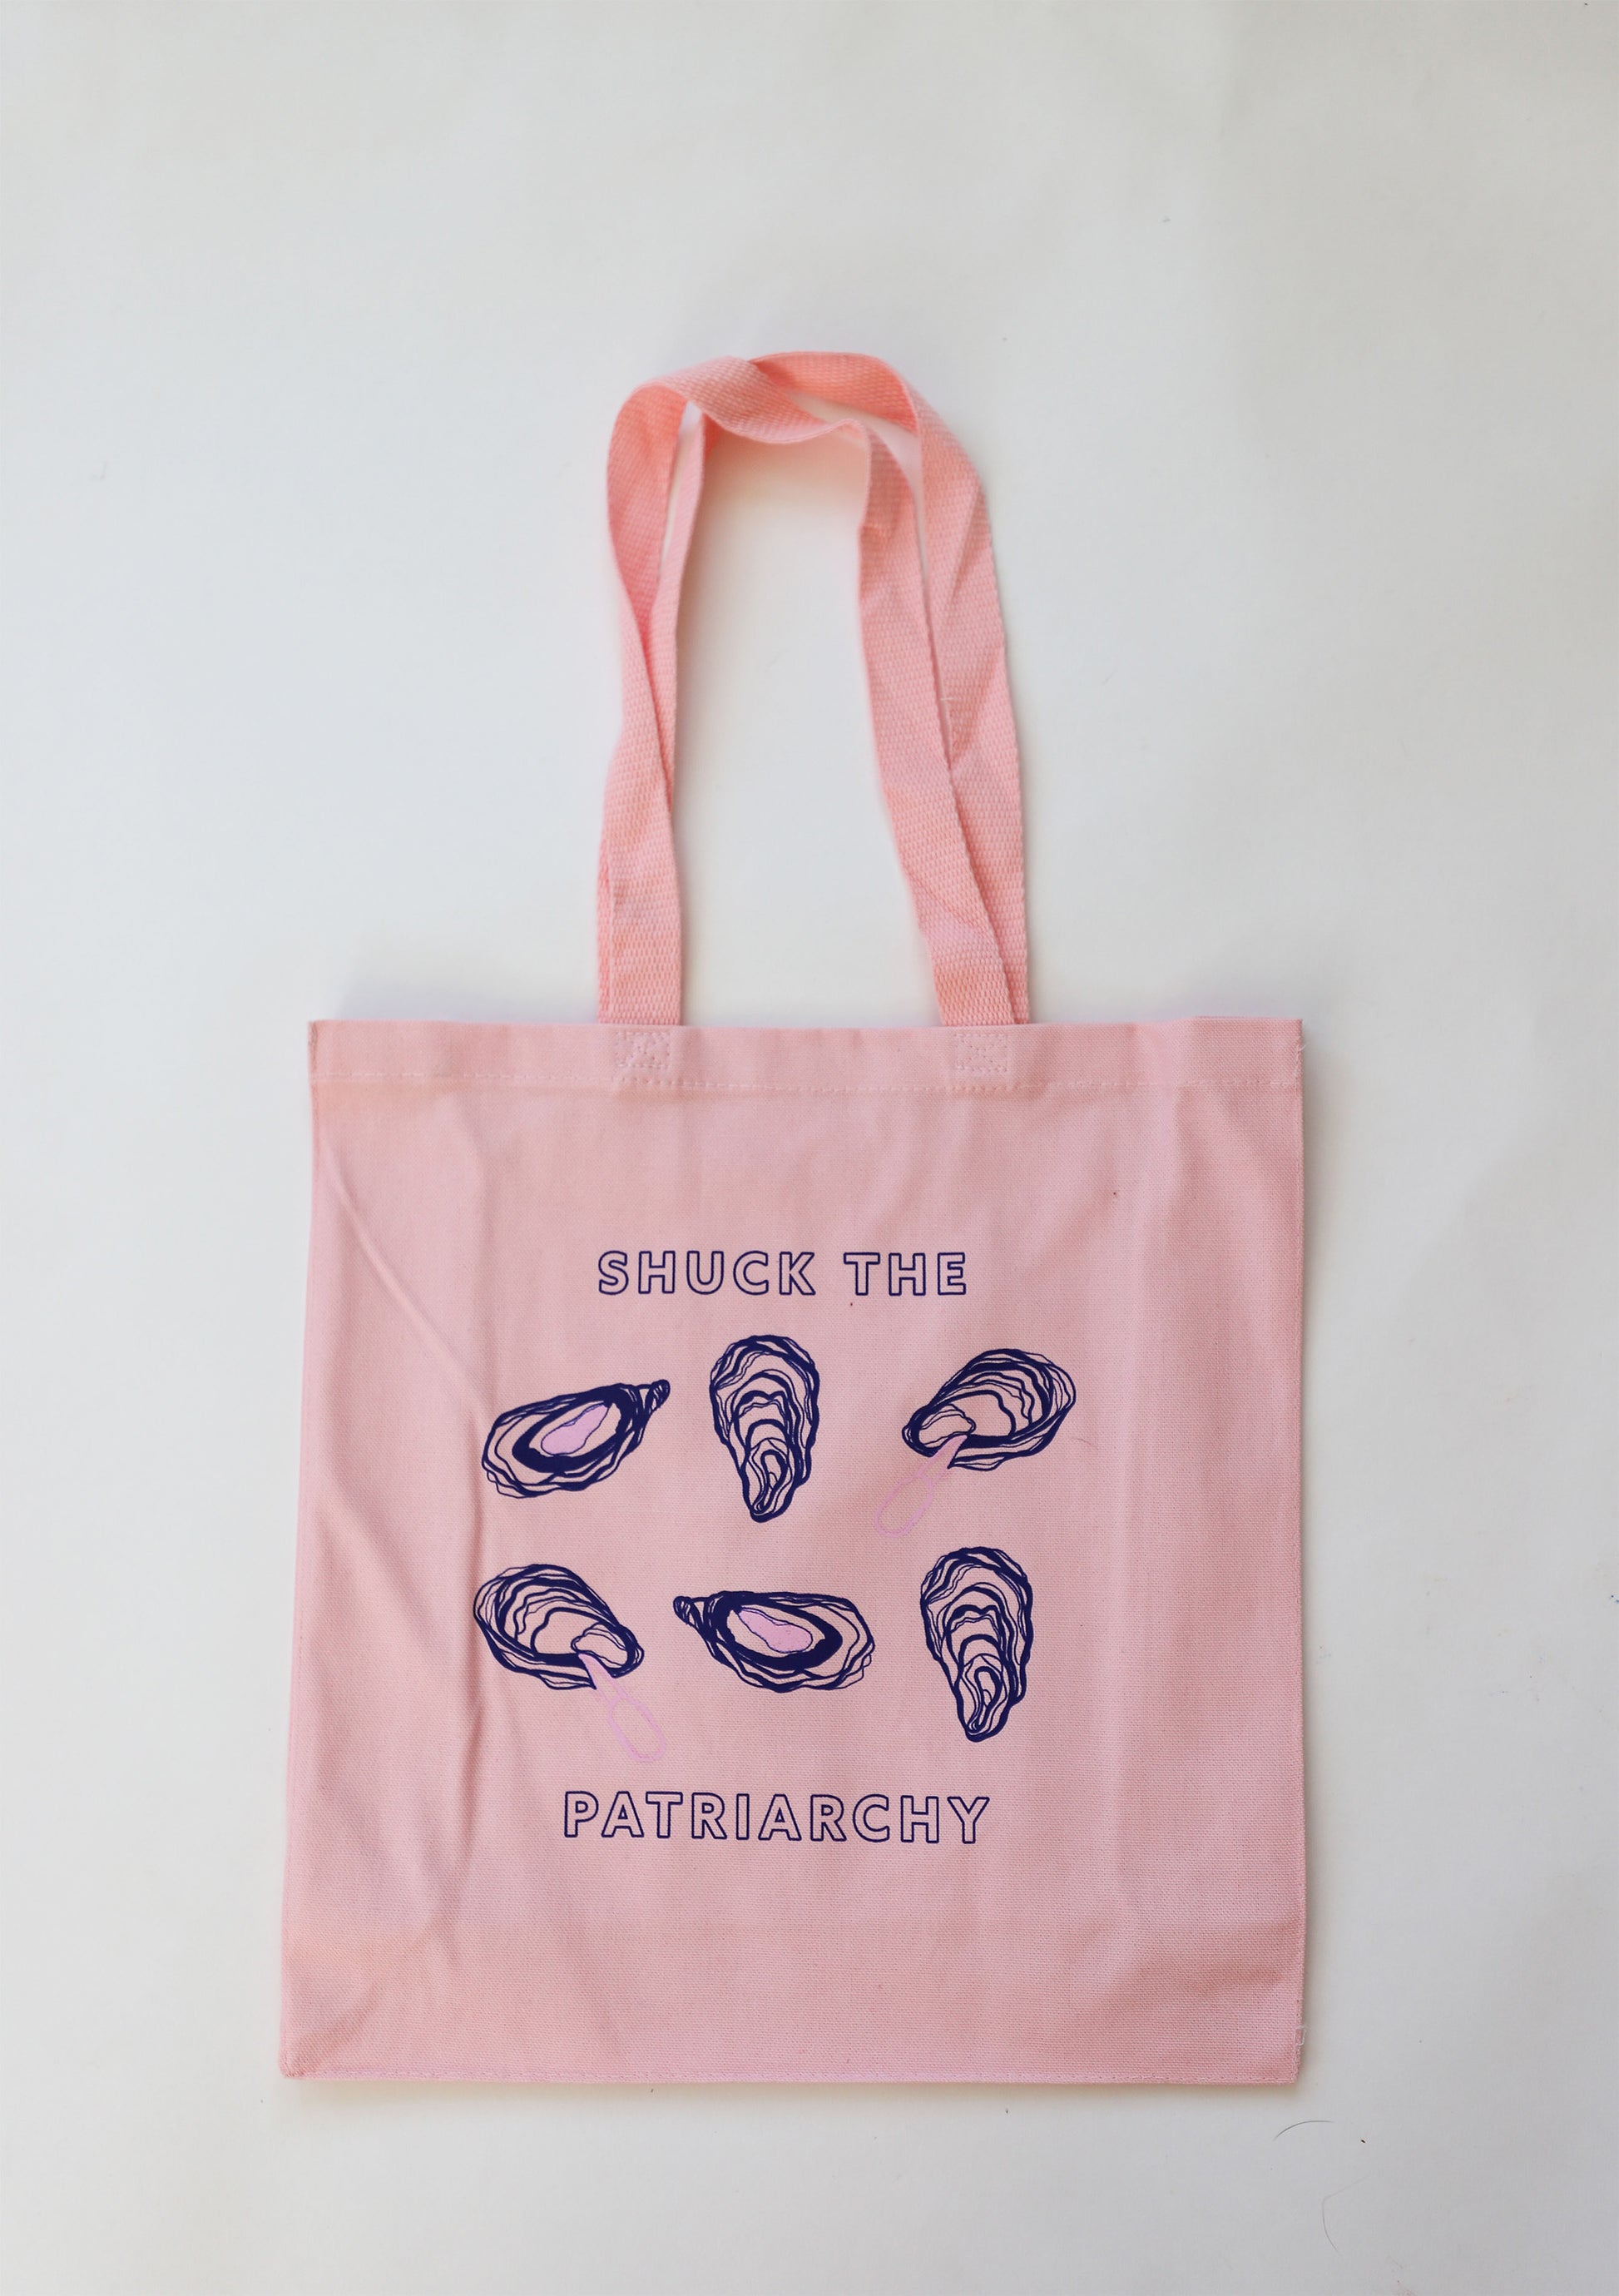 A pink canvas tote that reads "Shuck the Patriarchy" with oyster designs